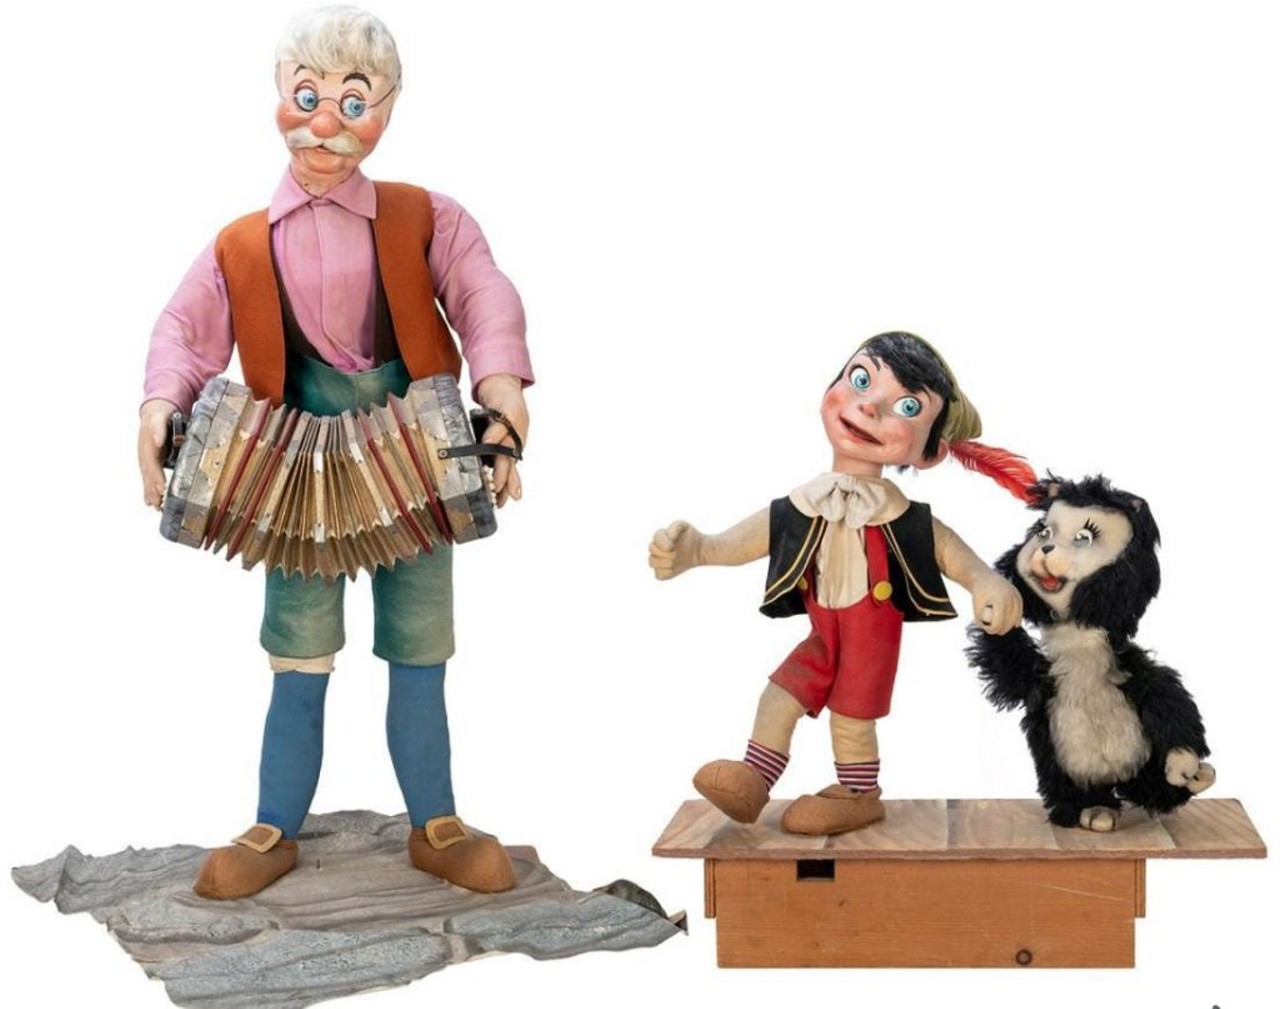 Pinocchio, Geppetto, and Figaro automatonsEstimated Sale Price: $10-20,000 
These are estimated at $10,000-20,000. These figures recreate the scene from Disney&#146;s 1940 film when Pinocchio, Geppetto, and Figaro celebrate Pinocchio becoming a real boy.